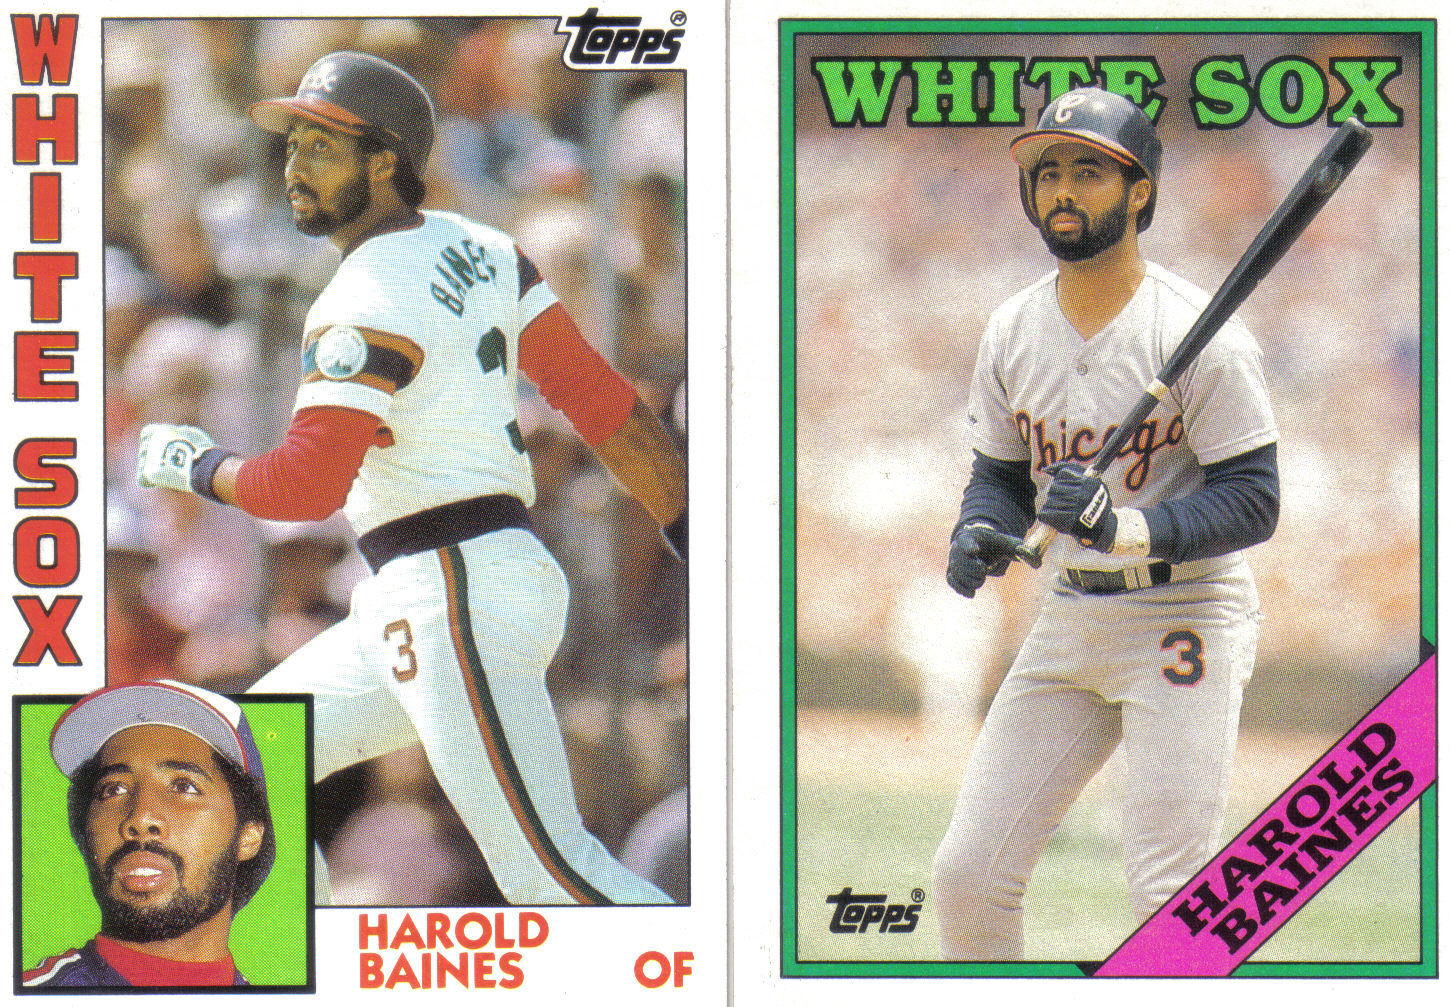 Tubbs Baseball Blog: The Quirk-y Truth about Harold Baines Wearing